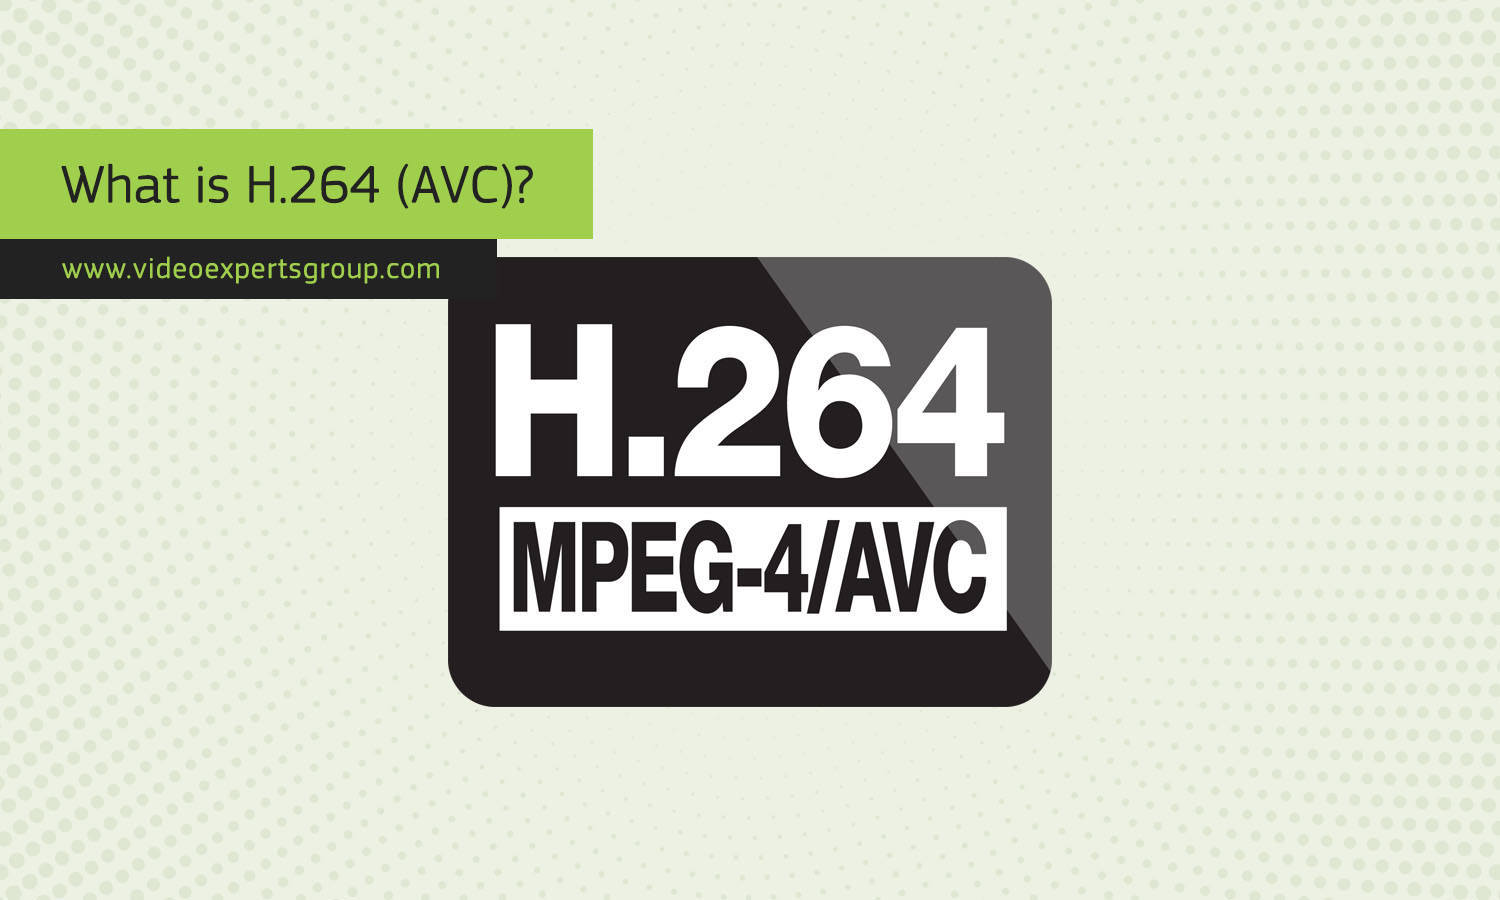 What is H.264 (AVC)?